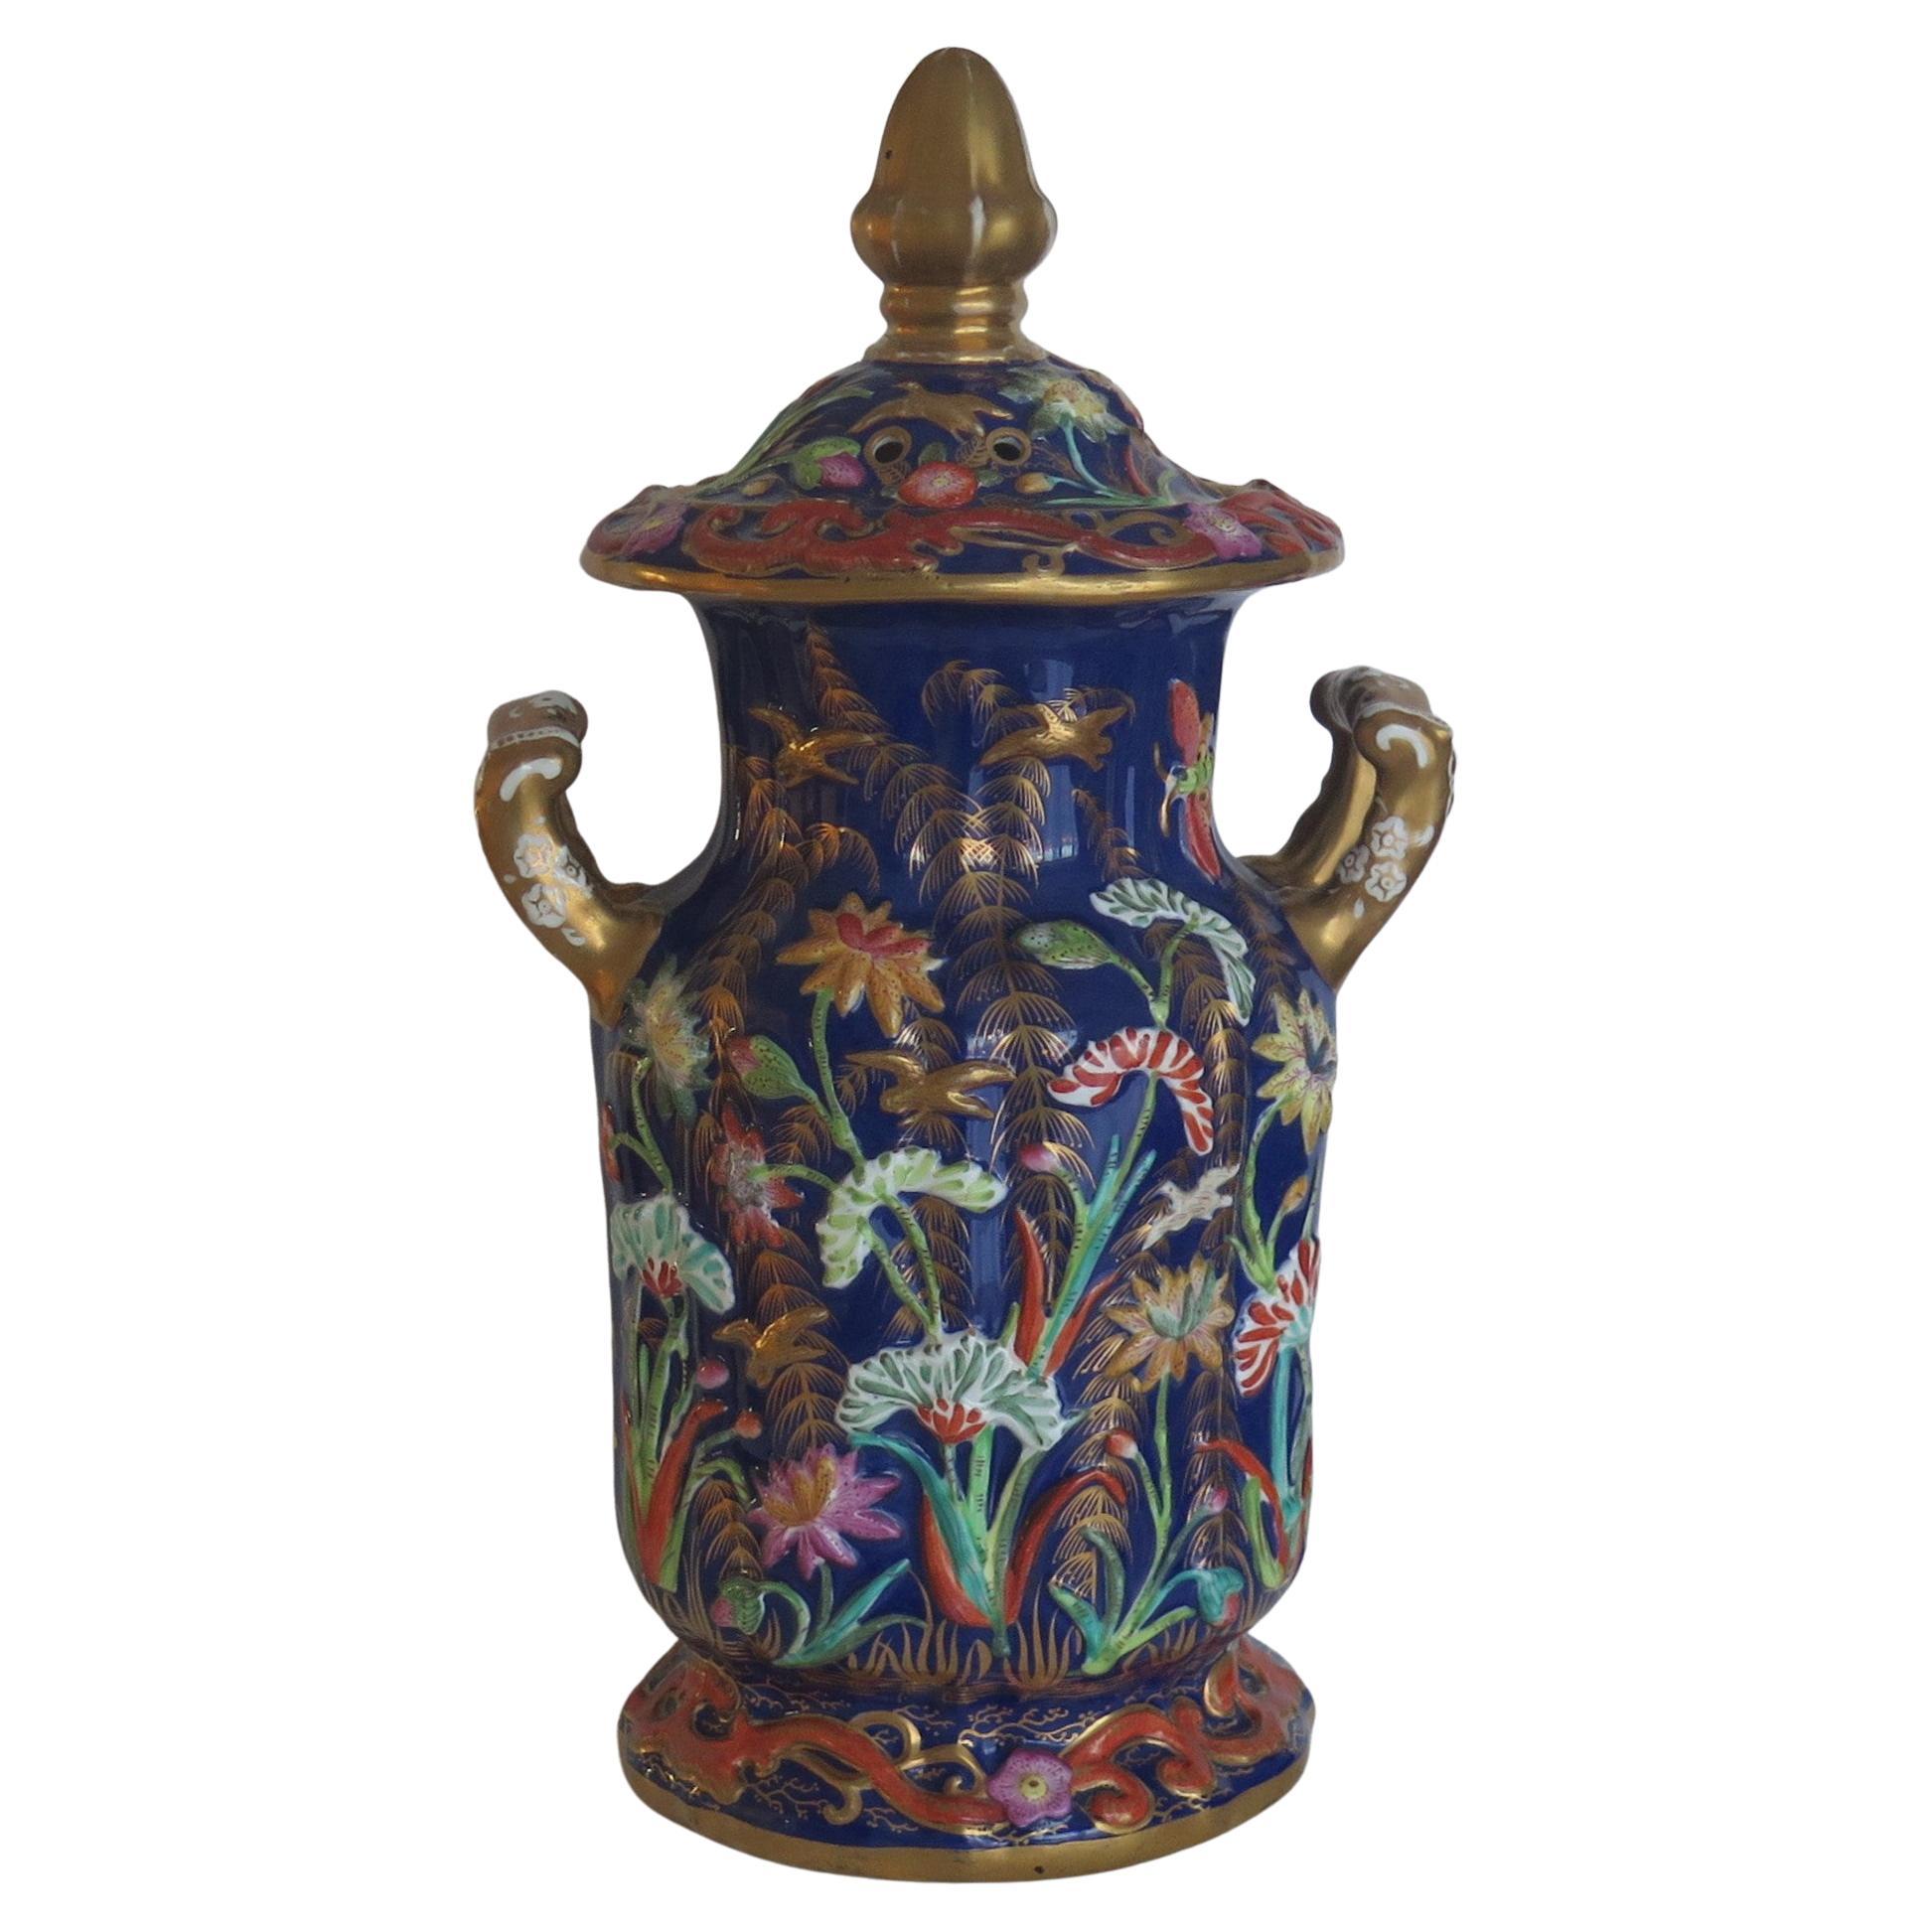 Very Large Masons Ironstone Covered Vase with rare Relief Motifs, Circa 1825 For Sale